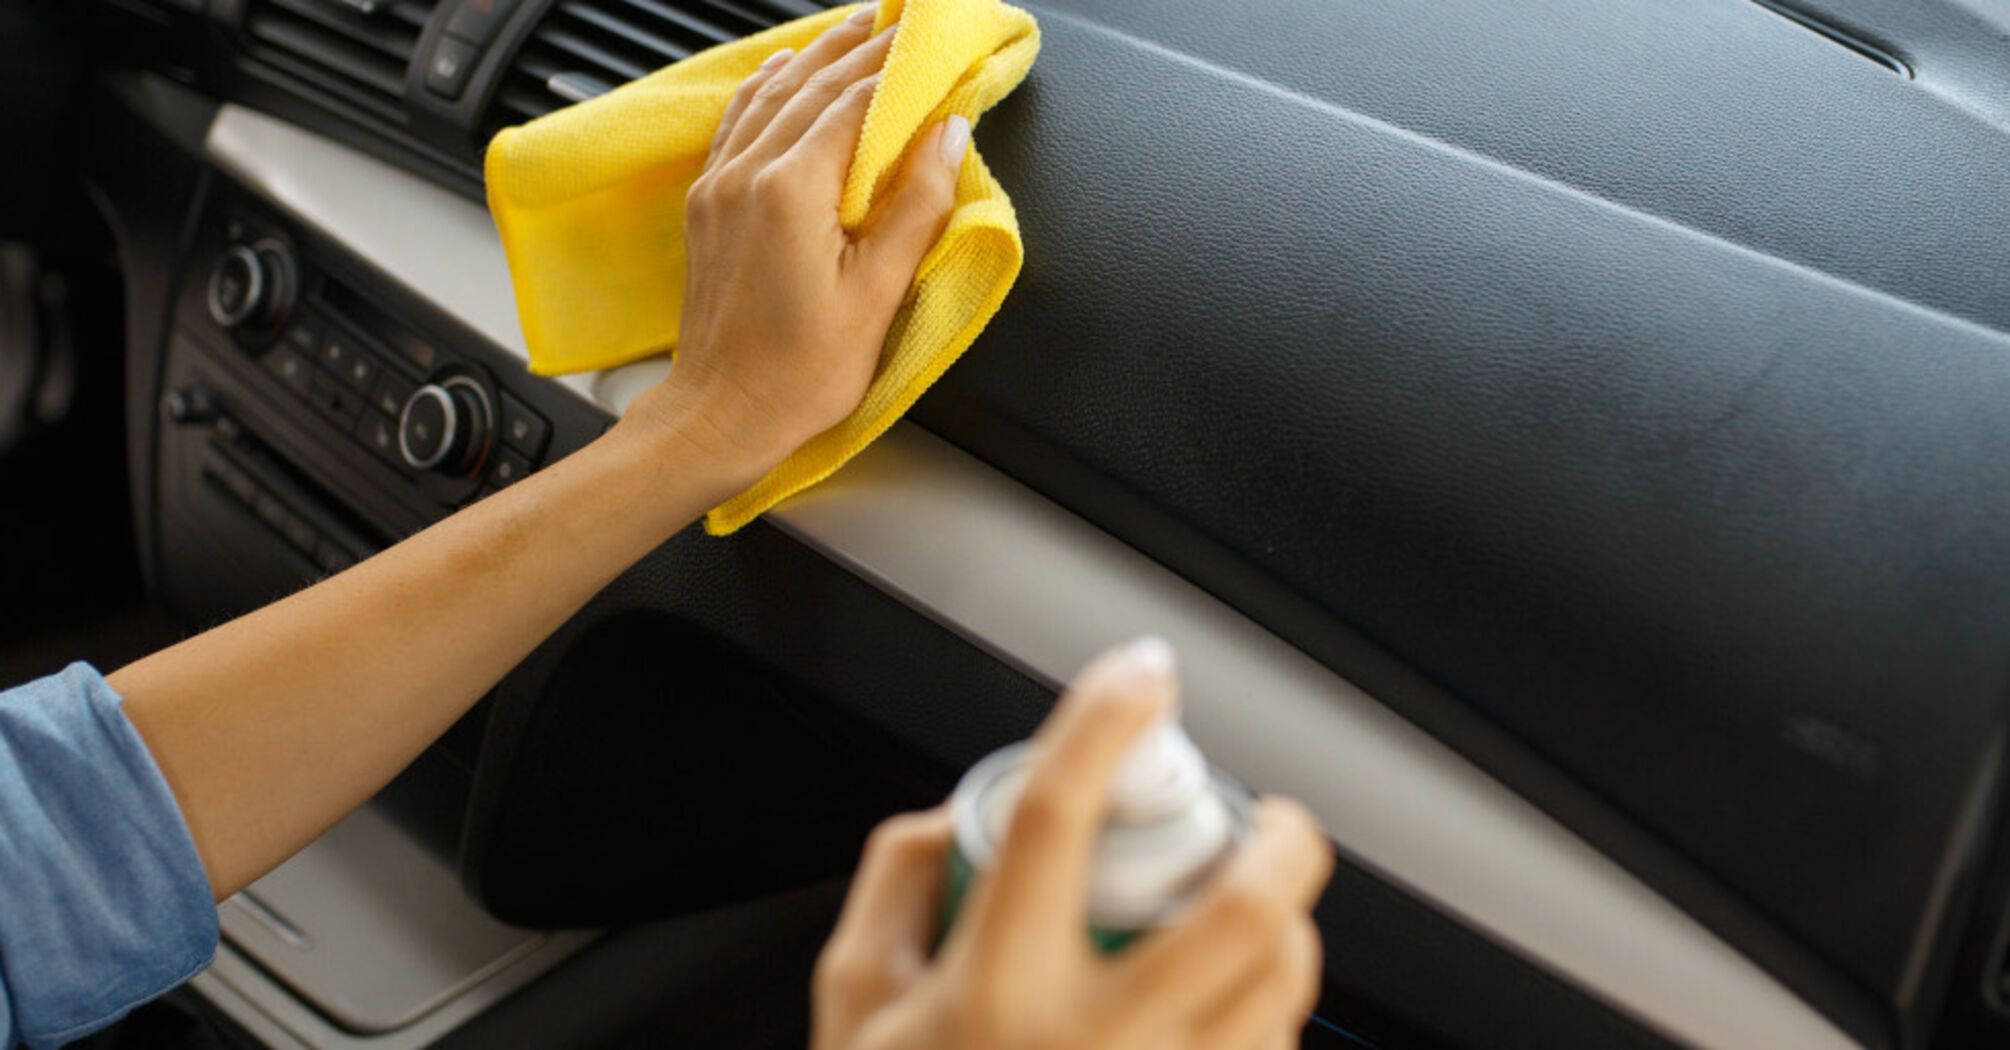 How to get rid of an unpleasant odor in the car